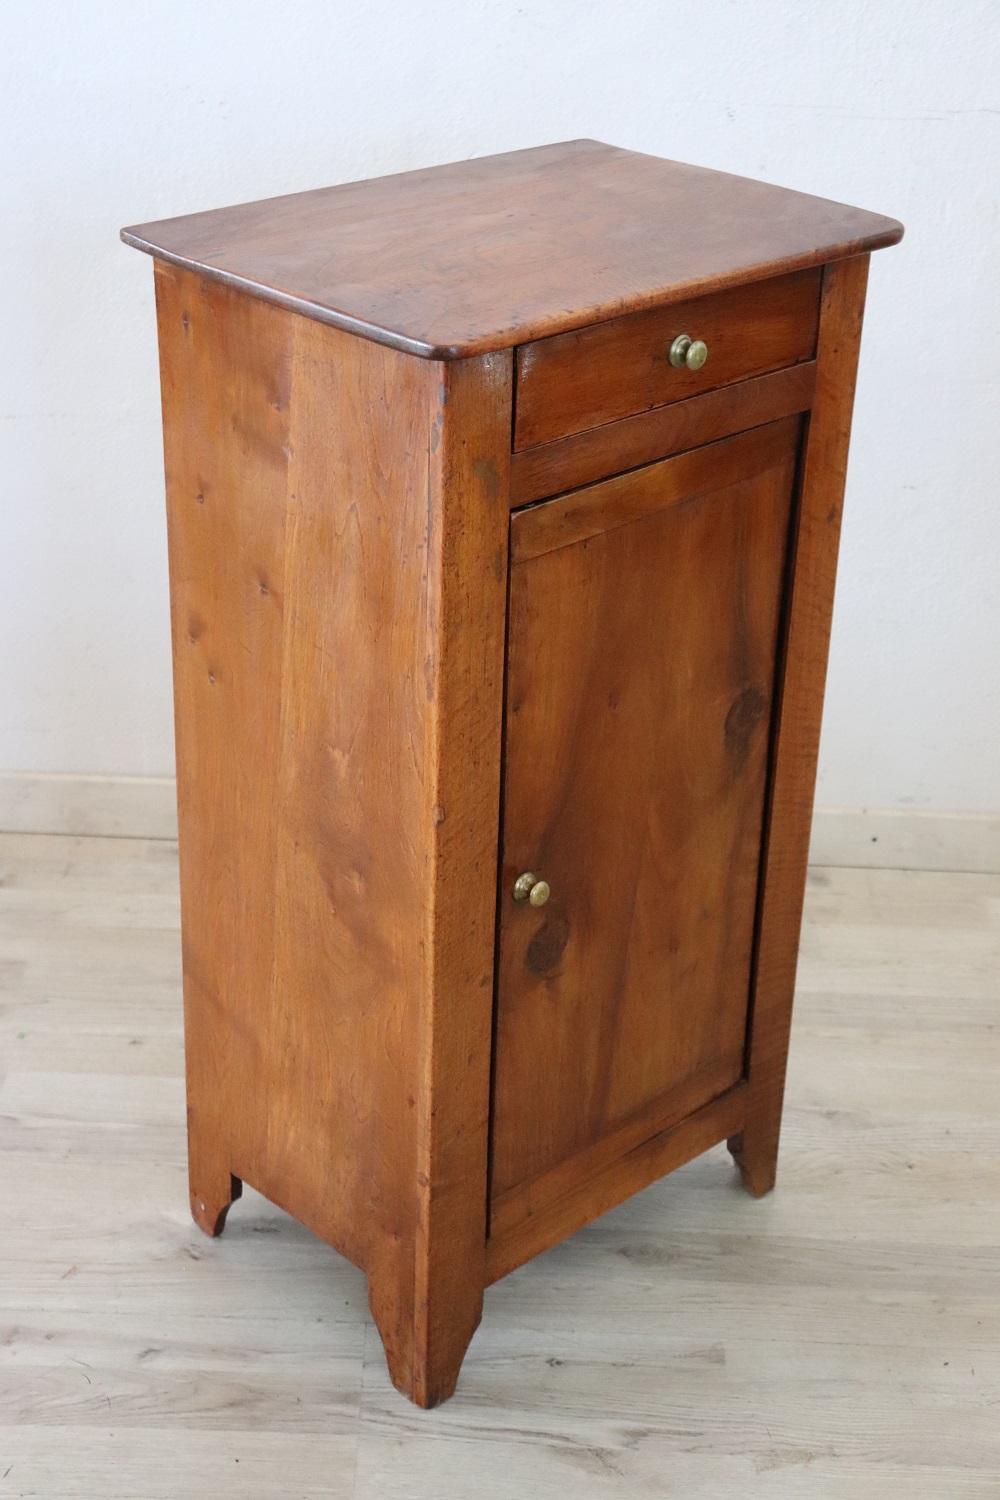 Lovely antique Italian nightstand of the period 1880 in solid walnut wood. The nightstand very refined linear and elegant. On the front one-drawer and one-door Very elegant ideal in every room of the house. Restored, ready to be inserted in your